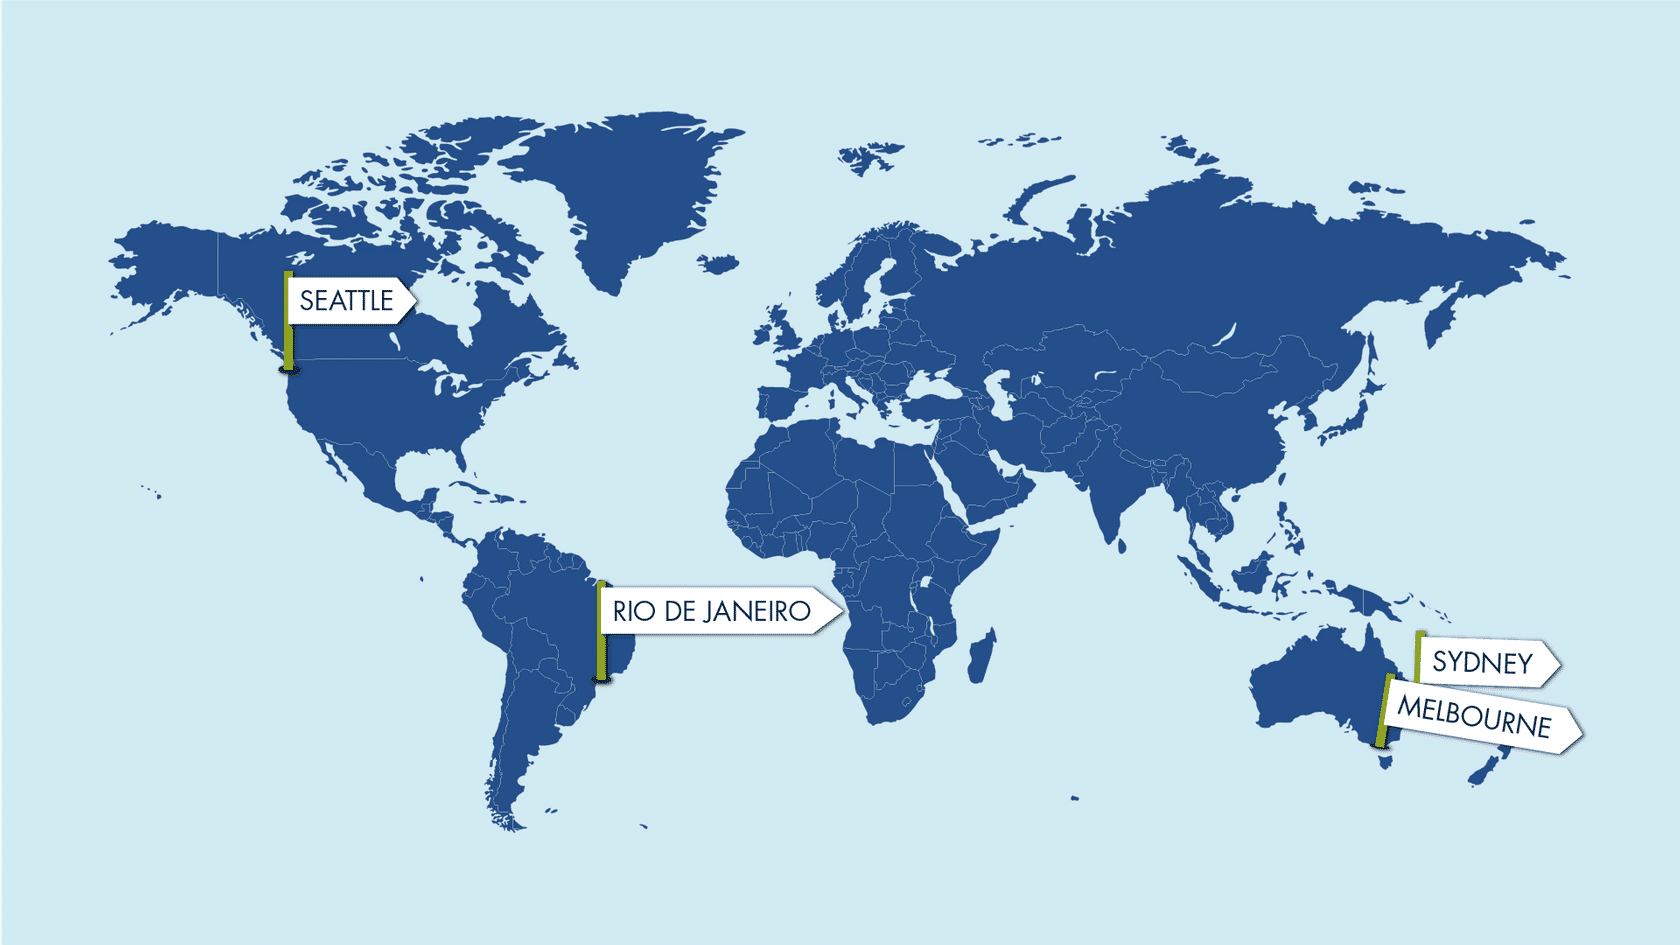 atlas map of the world, with signposts highlighting locations for Seattle, Rio De Janeiro, Sydney and Melbourne